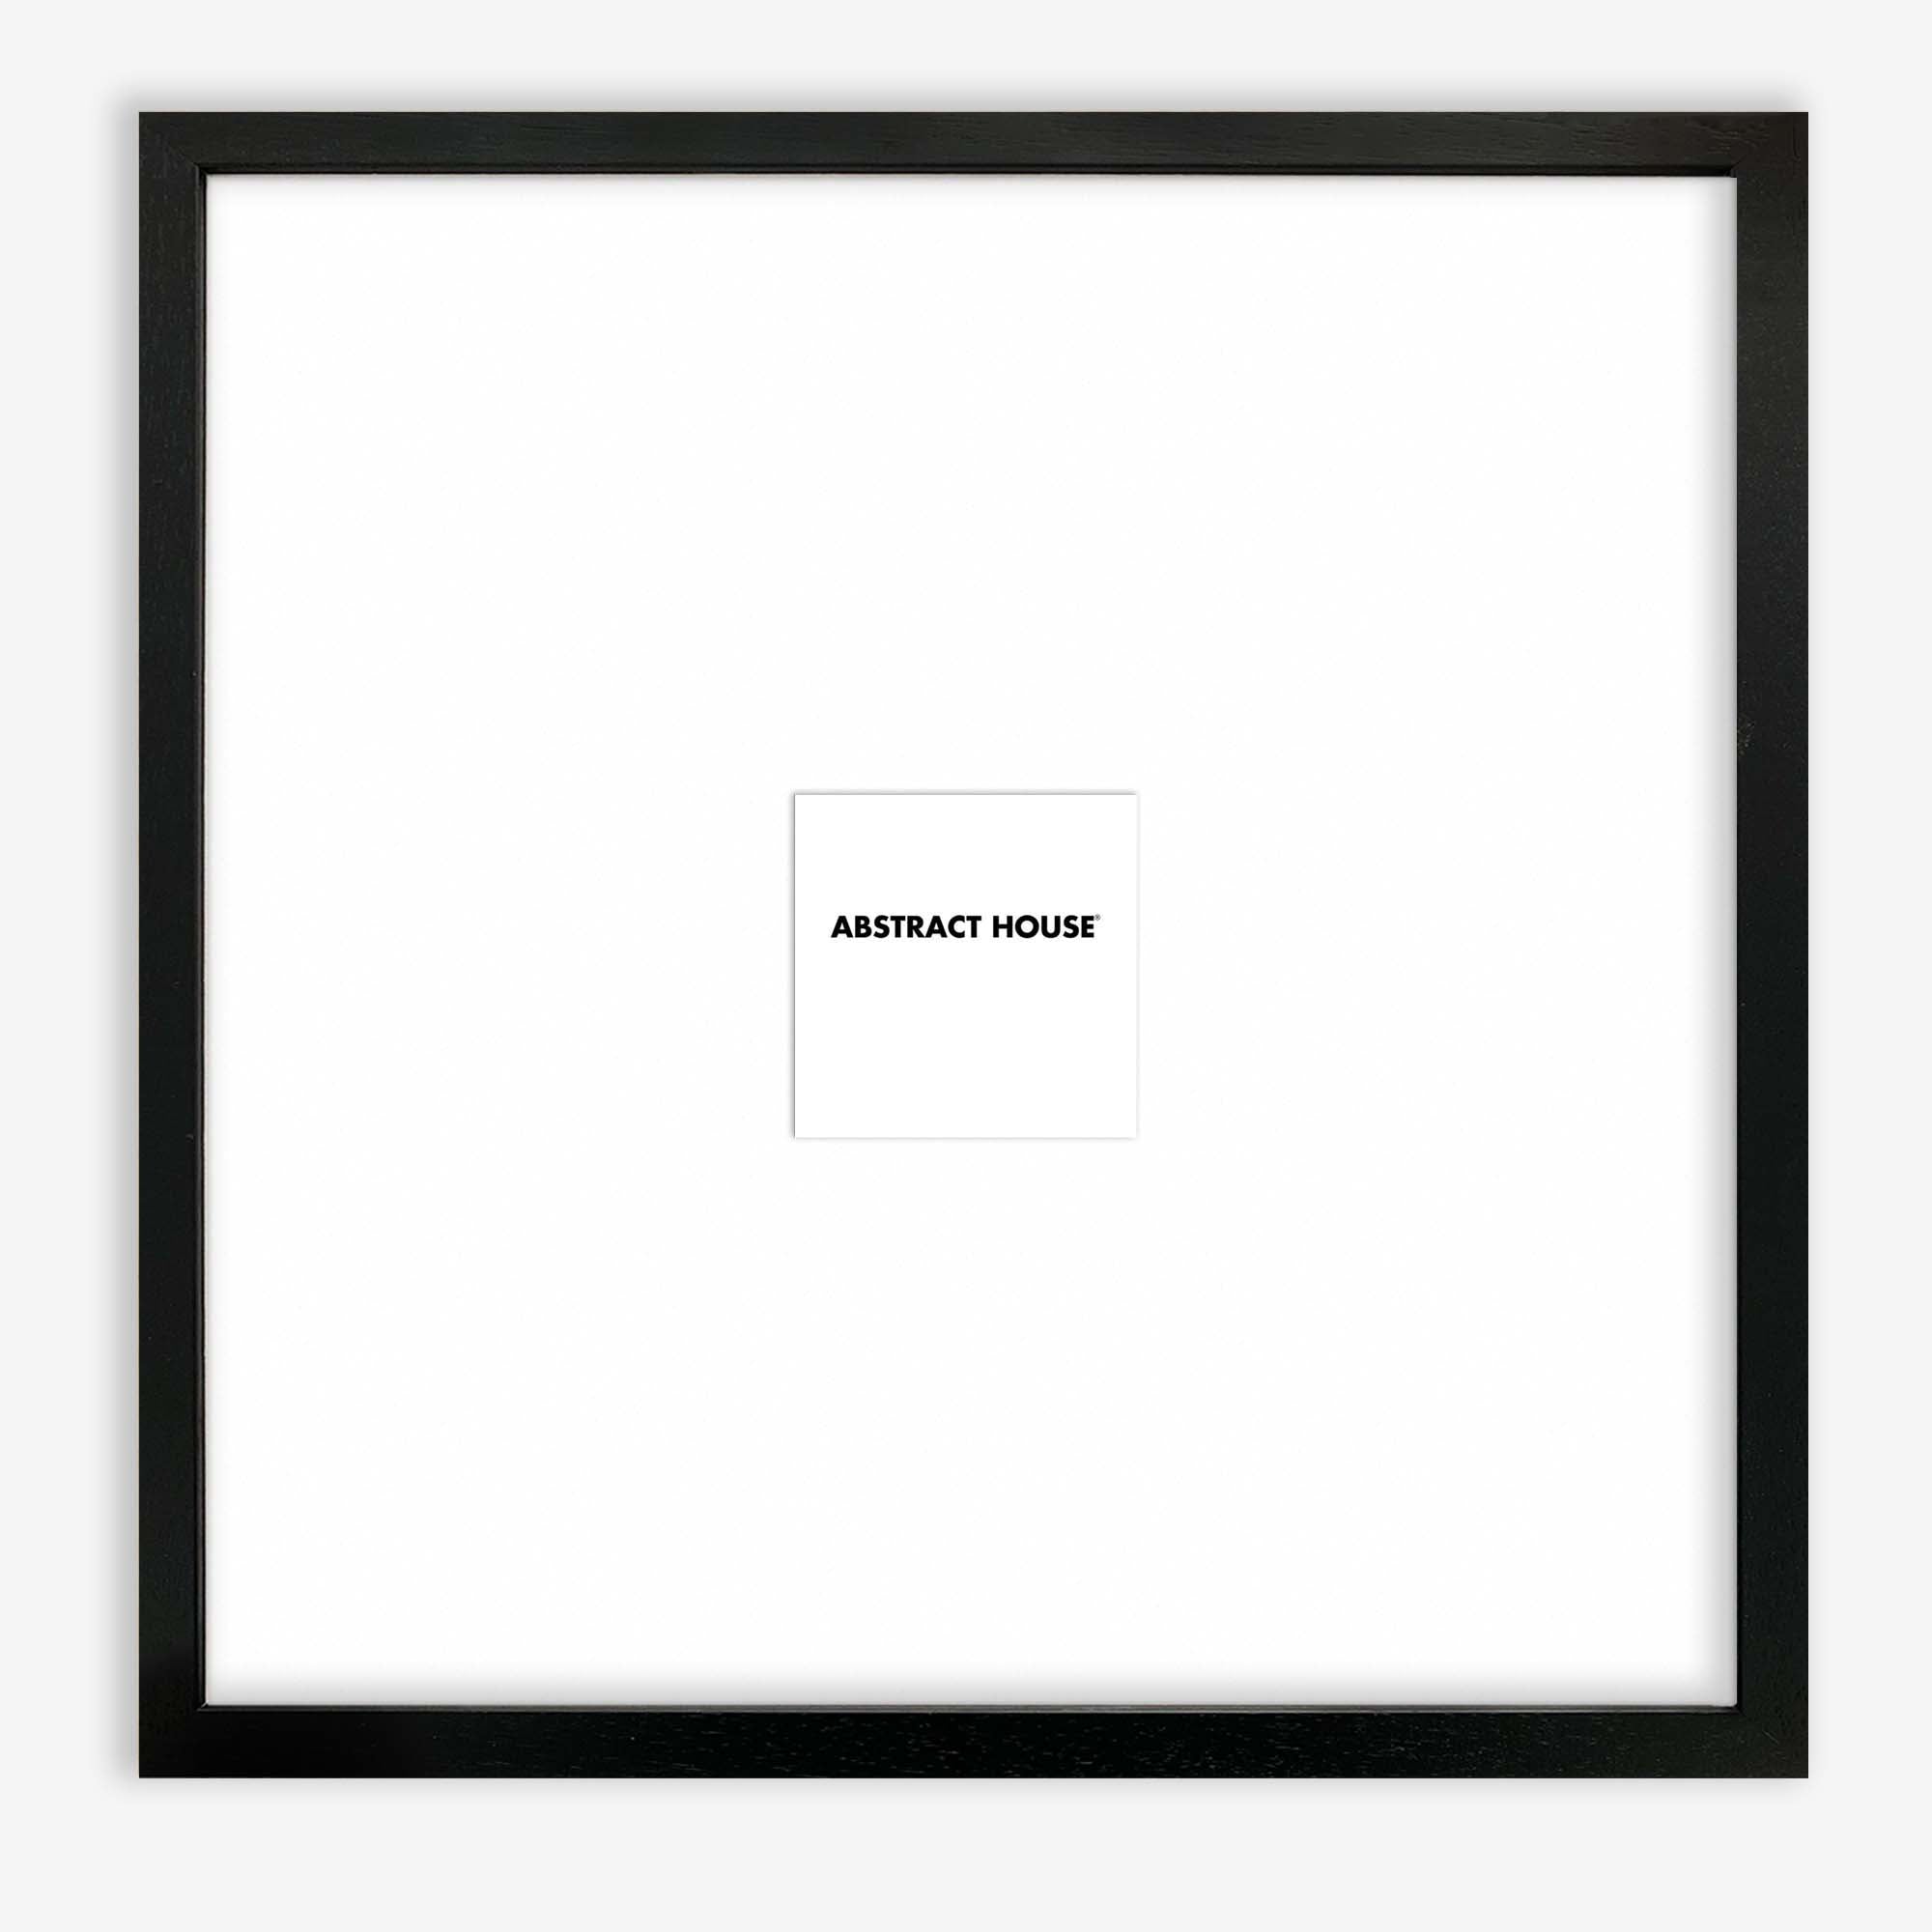 50x50 cm Wooden Frame-Black-10 x 10 cm / 3.9 x 3.9 Inches-Abstract House